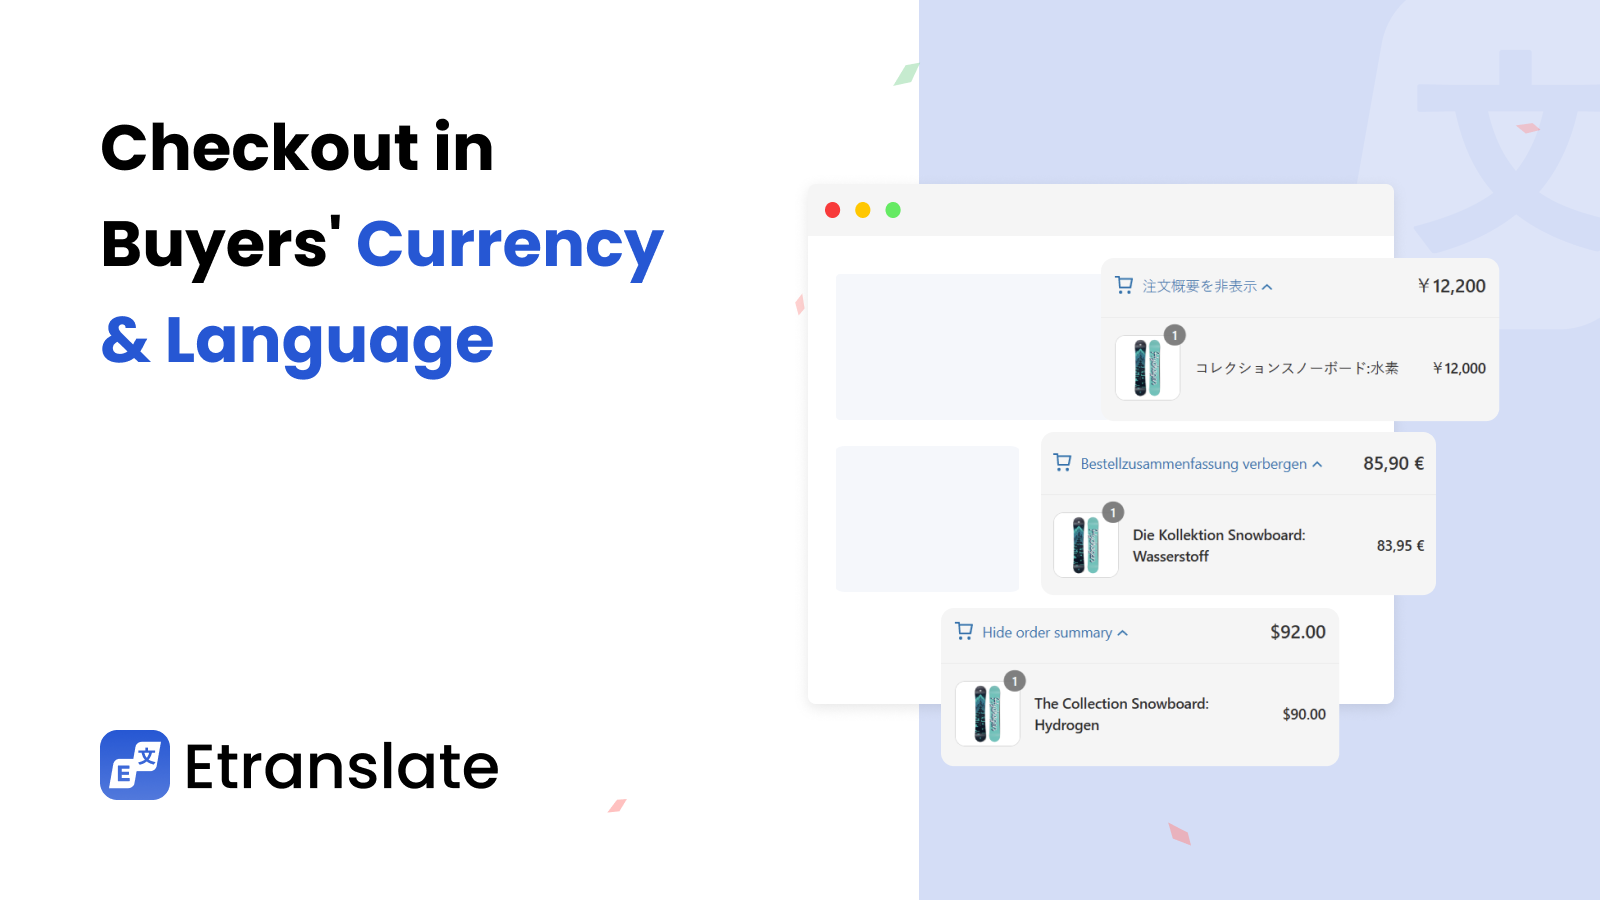 Convert currency & language in checkout page